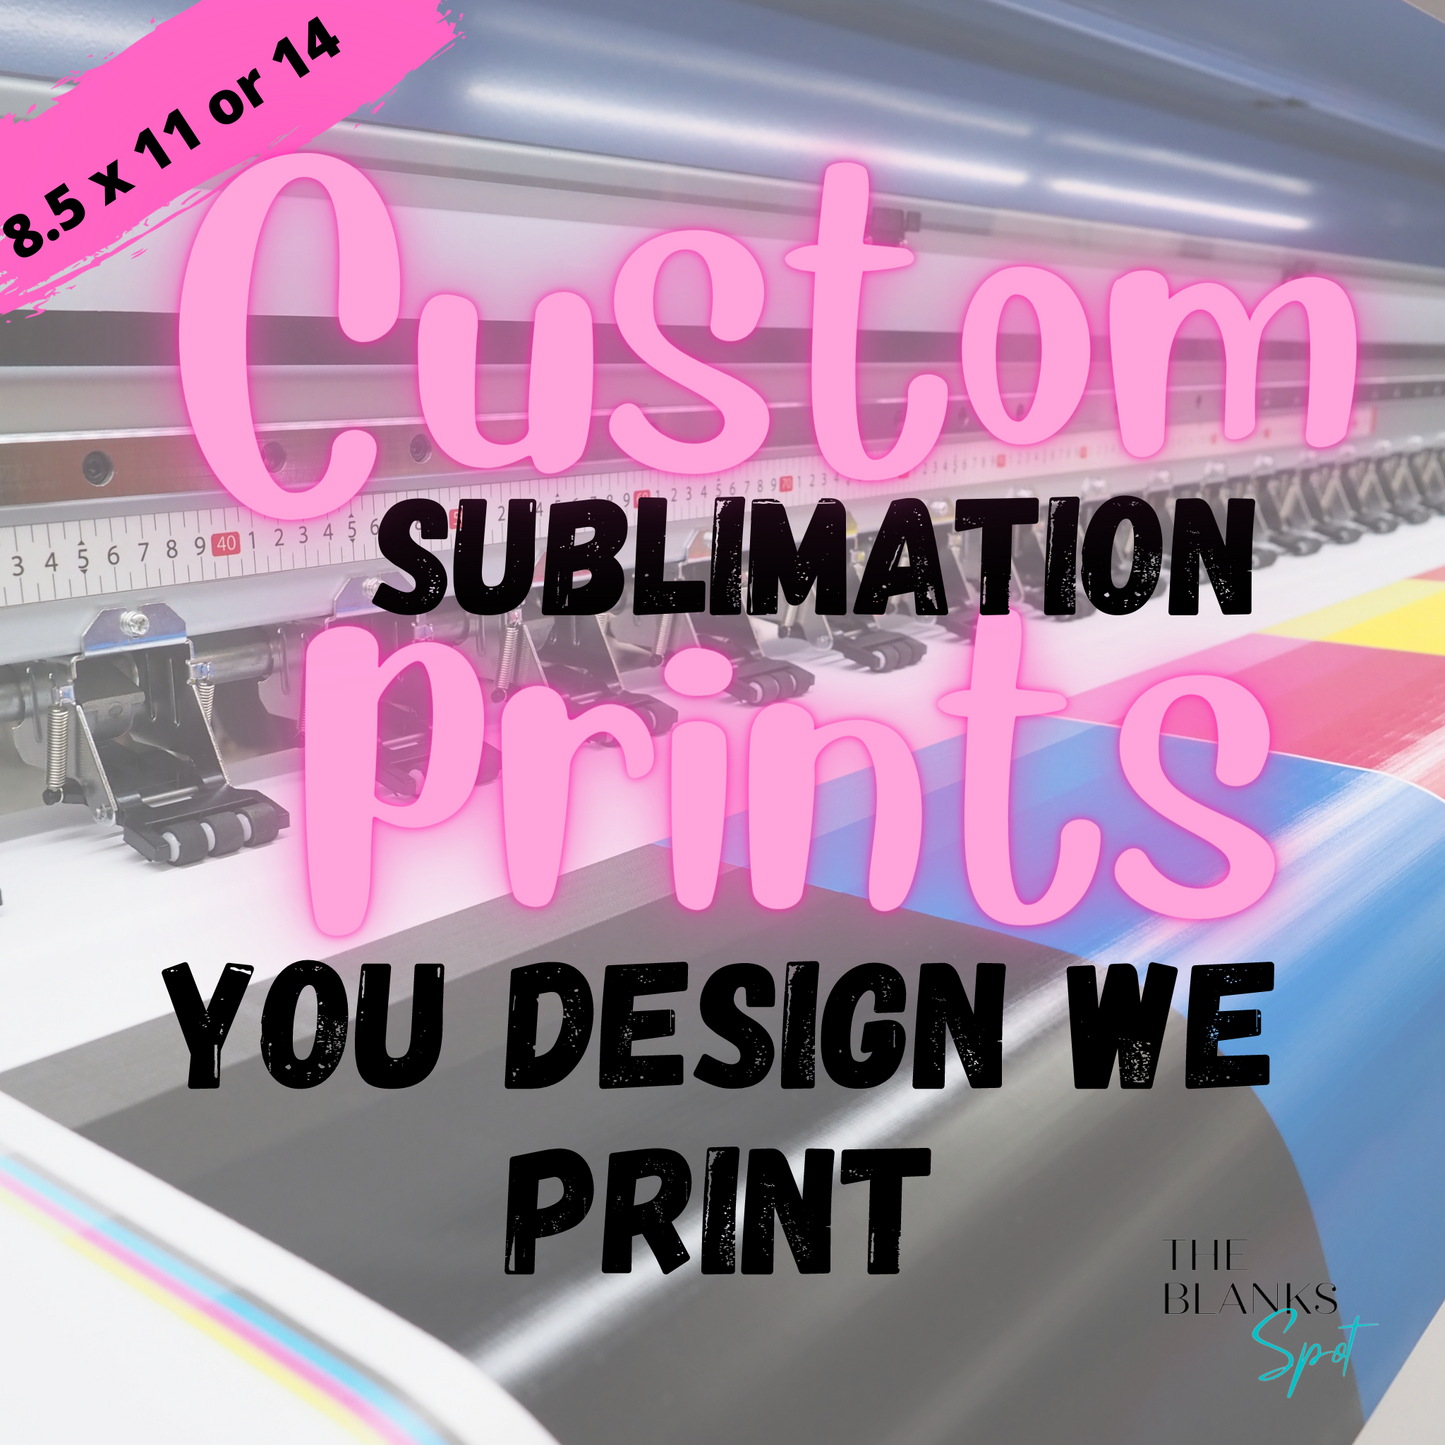 Custom Sublimation Print(s) 8.5 x 11 or 8.5 x 14 Sheet (For All Substrates)